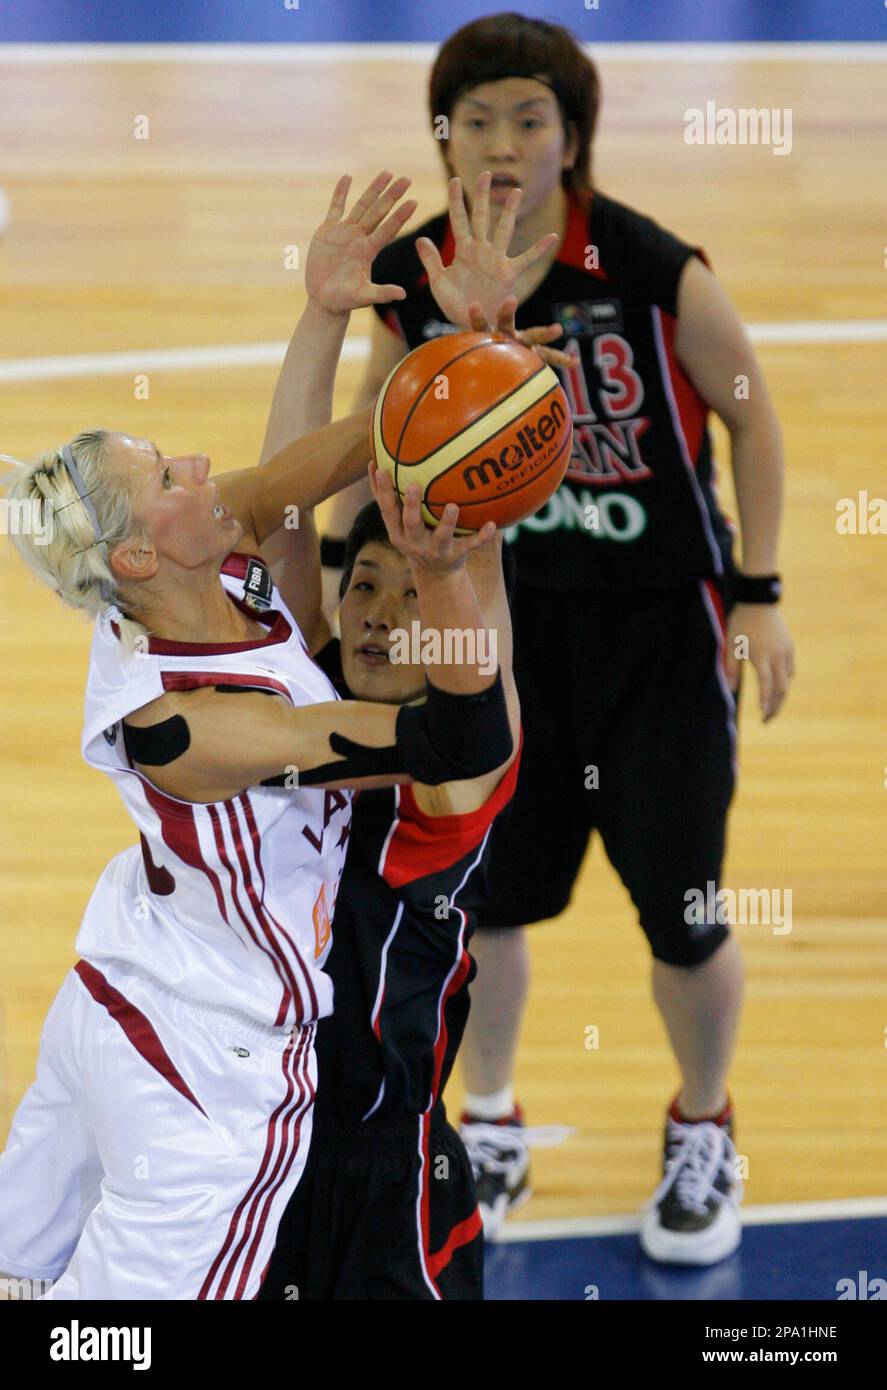 Japan's basketball player Sachiko Ishikawa, left, drives to the basket  against Latvia's player Liene Jansone during their preliminary round of the  FIBA Olympic qualifying tournament at the Arena Palace, in Madrid,  Wednesday,